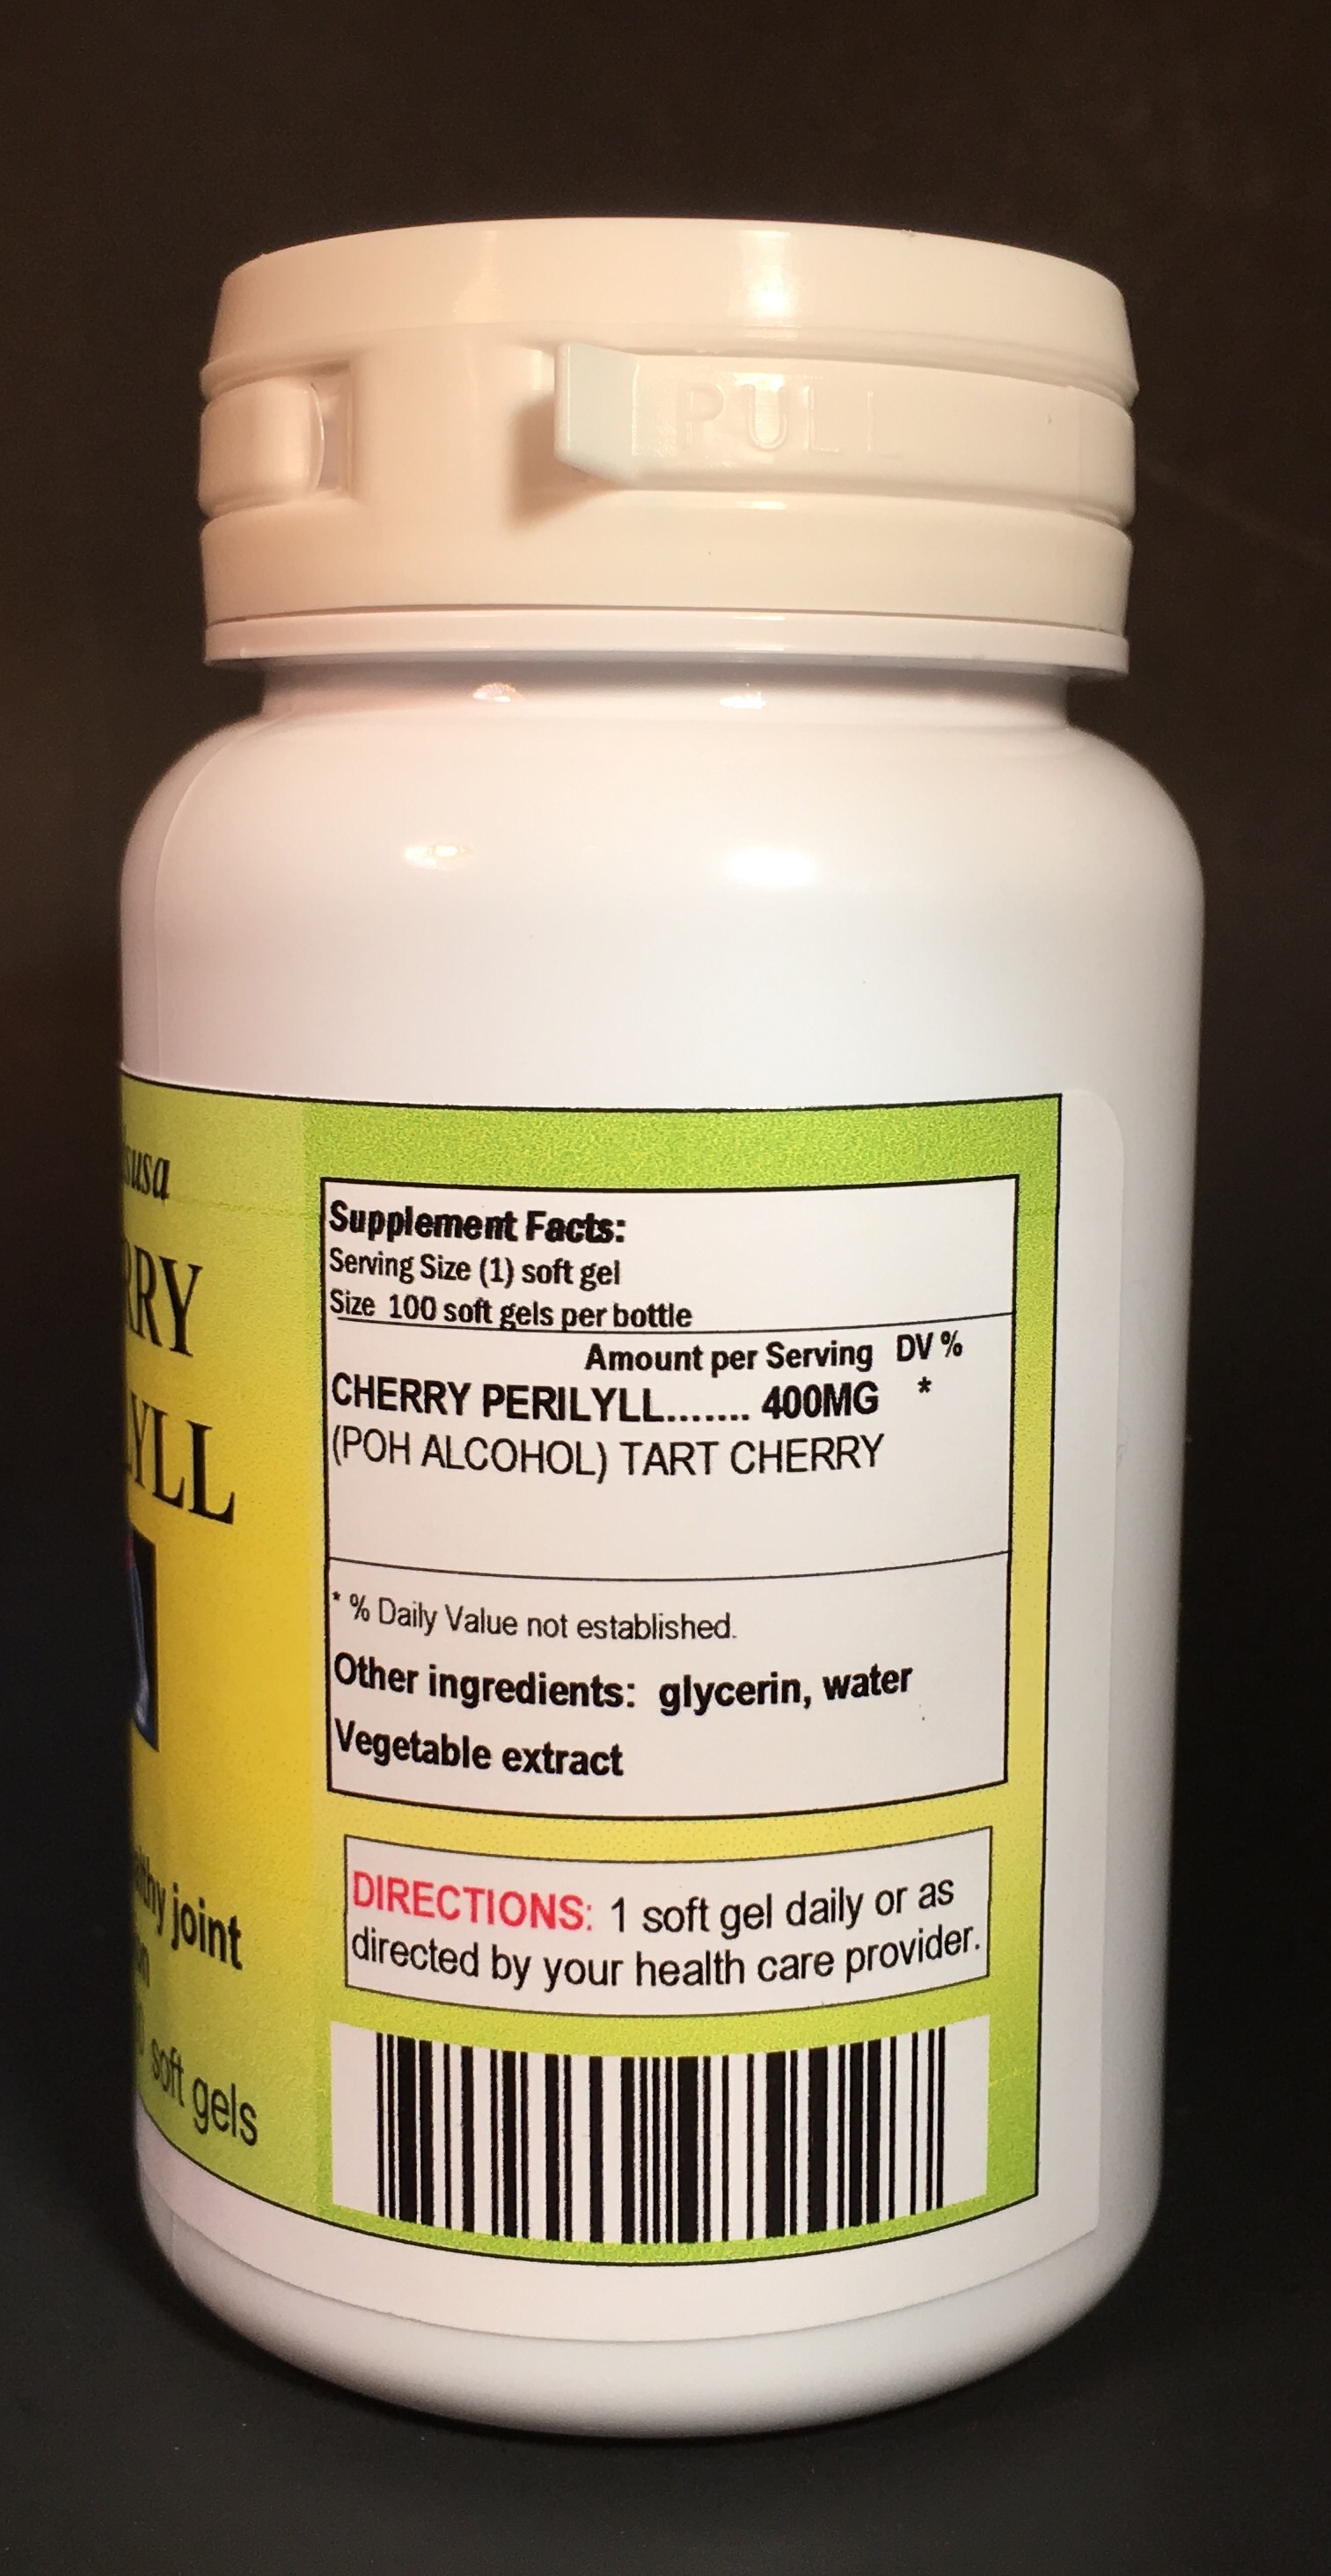 Cherry Perrillyl, Gout aid - 100 soft gels